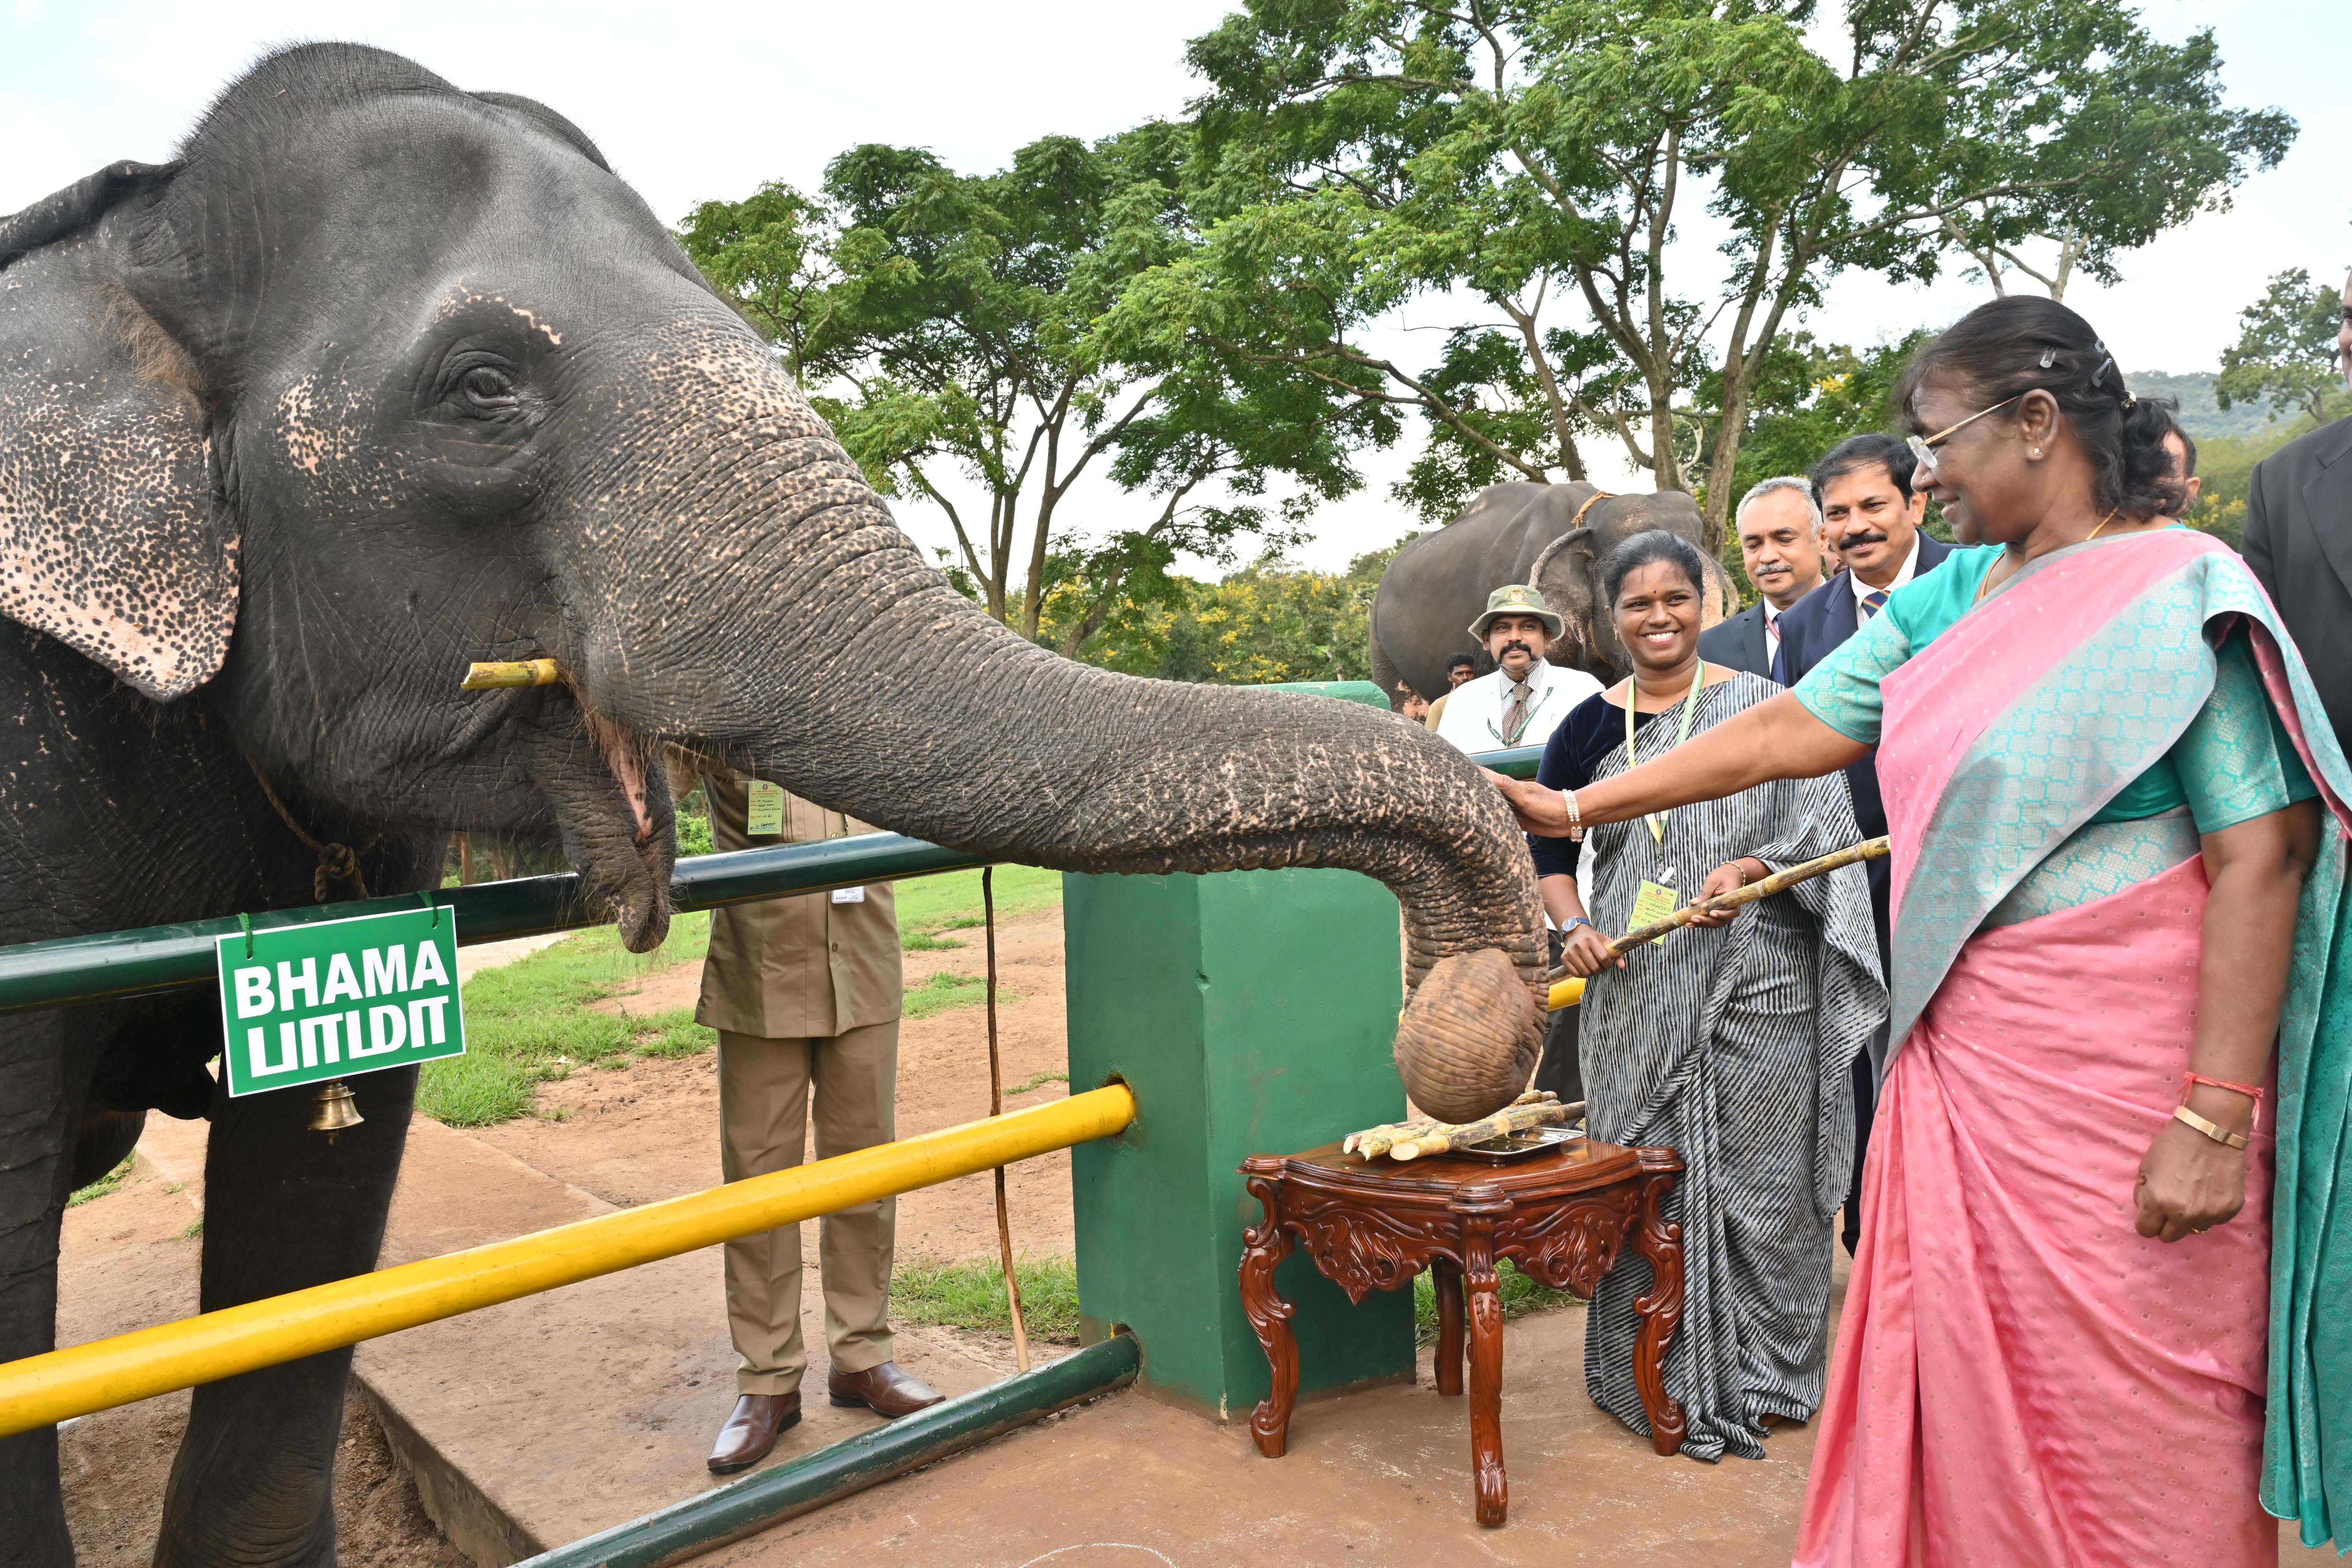 The President of India, Smt Droupadi Murmu visited Theppakadu Elephant Camp, one of Asia’s oldest Elephant camps, at the Mudumalai Tiger Reserve on August 5, 2023.